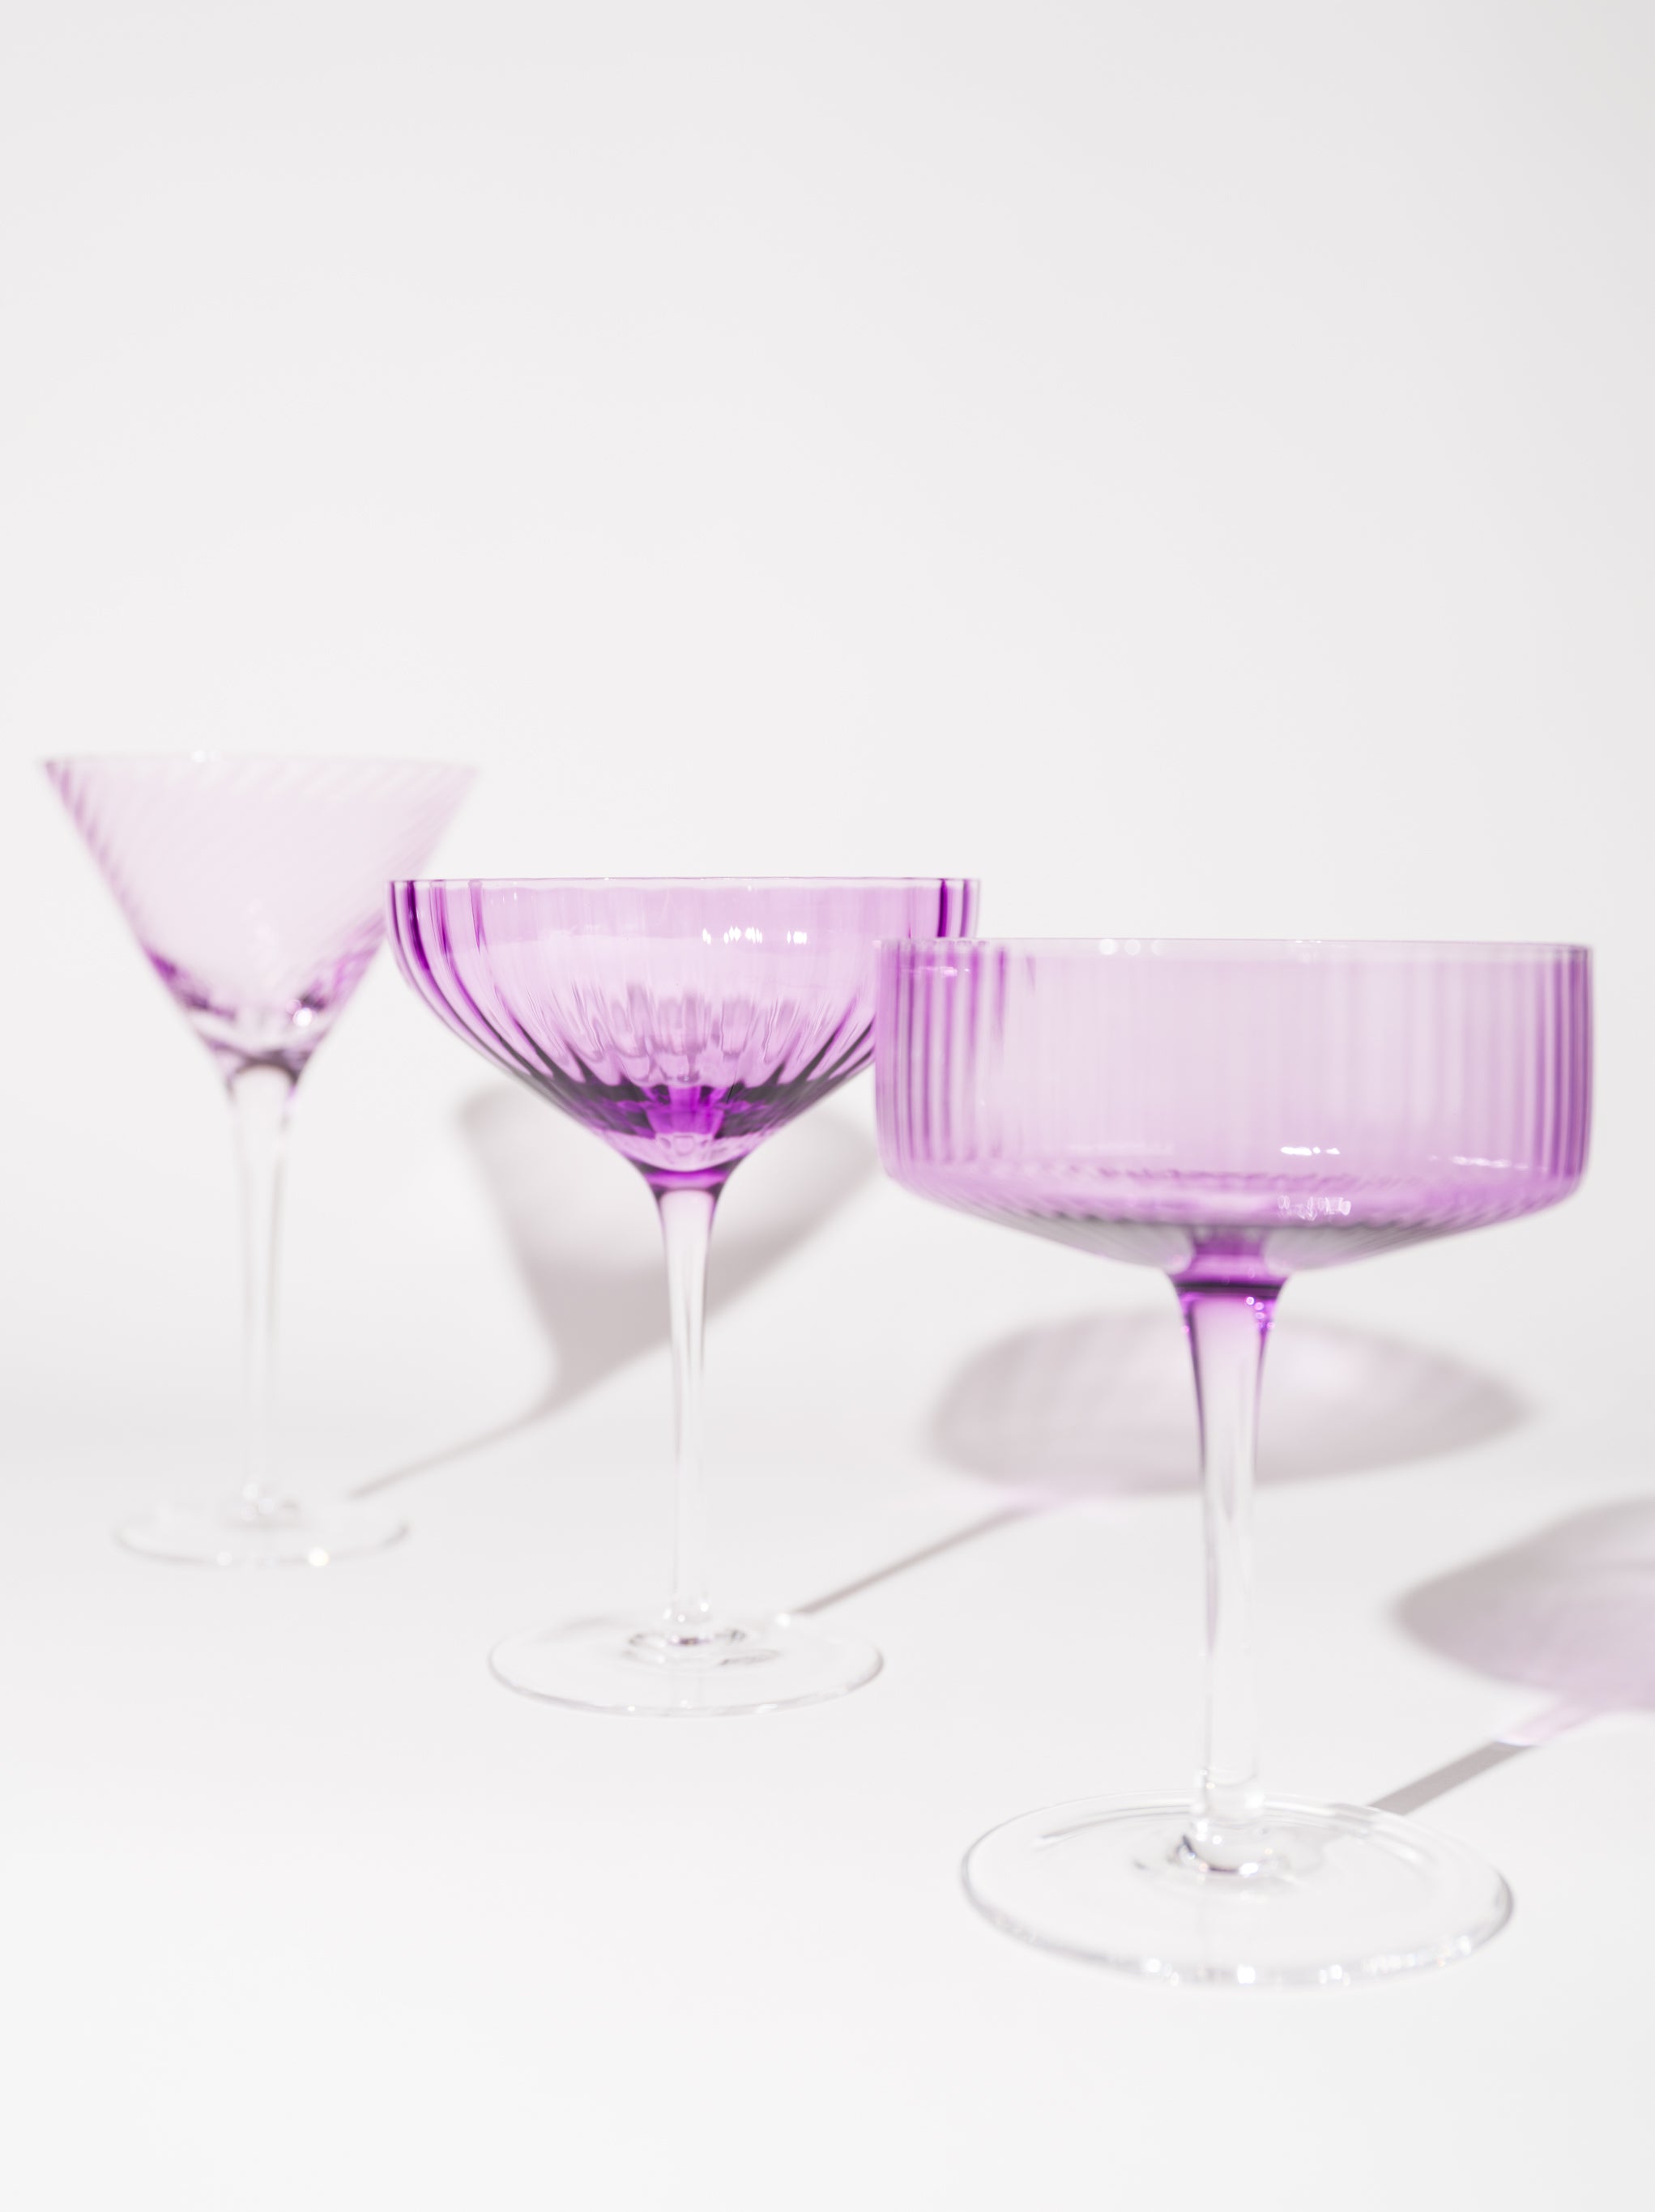 Lavender Coupe Cocktail Glasses, Set of 3